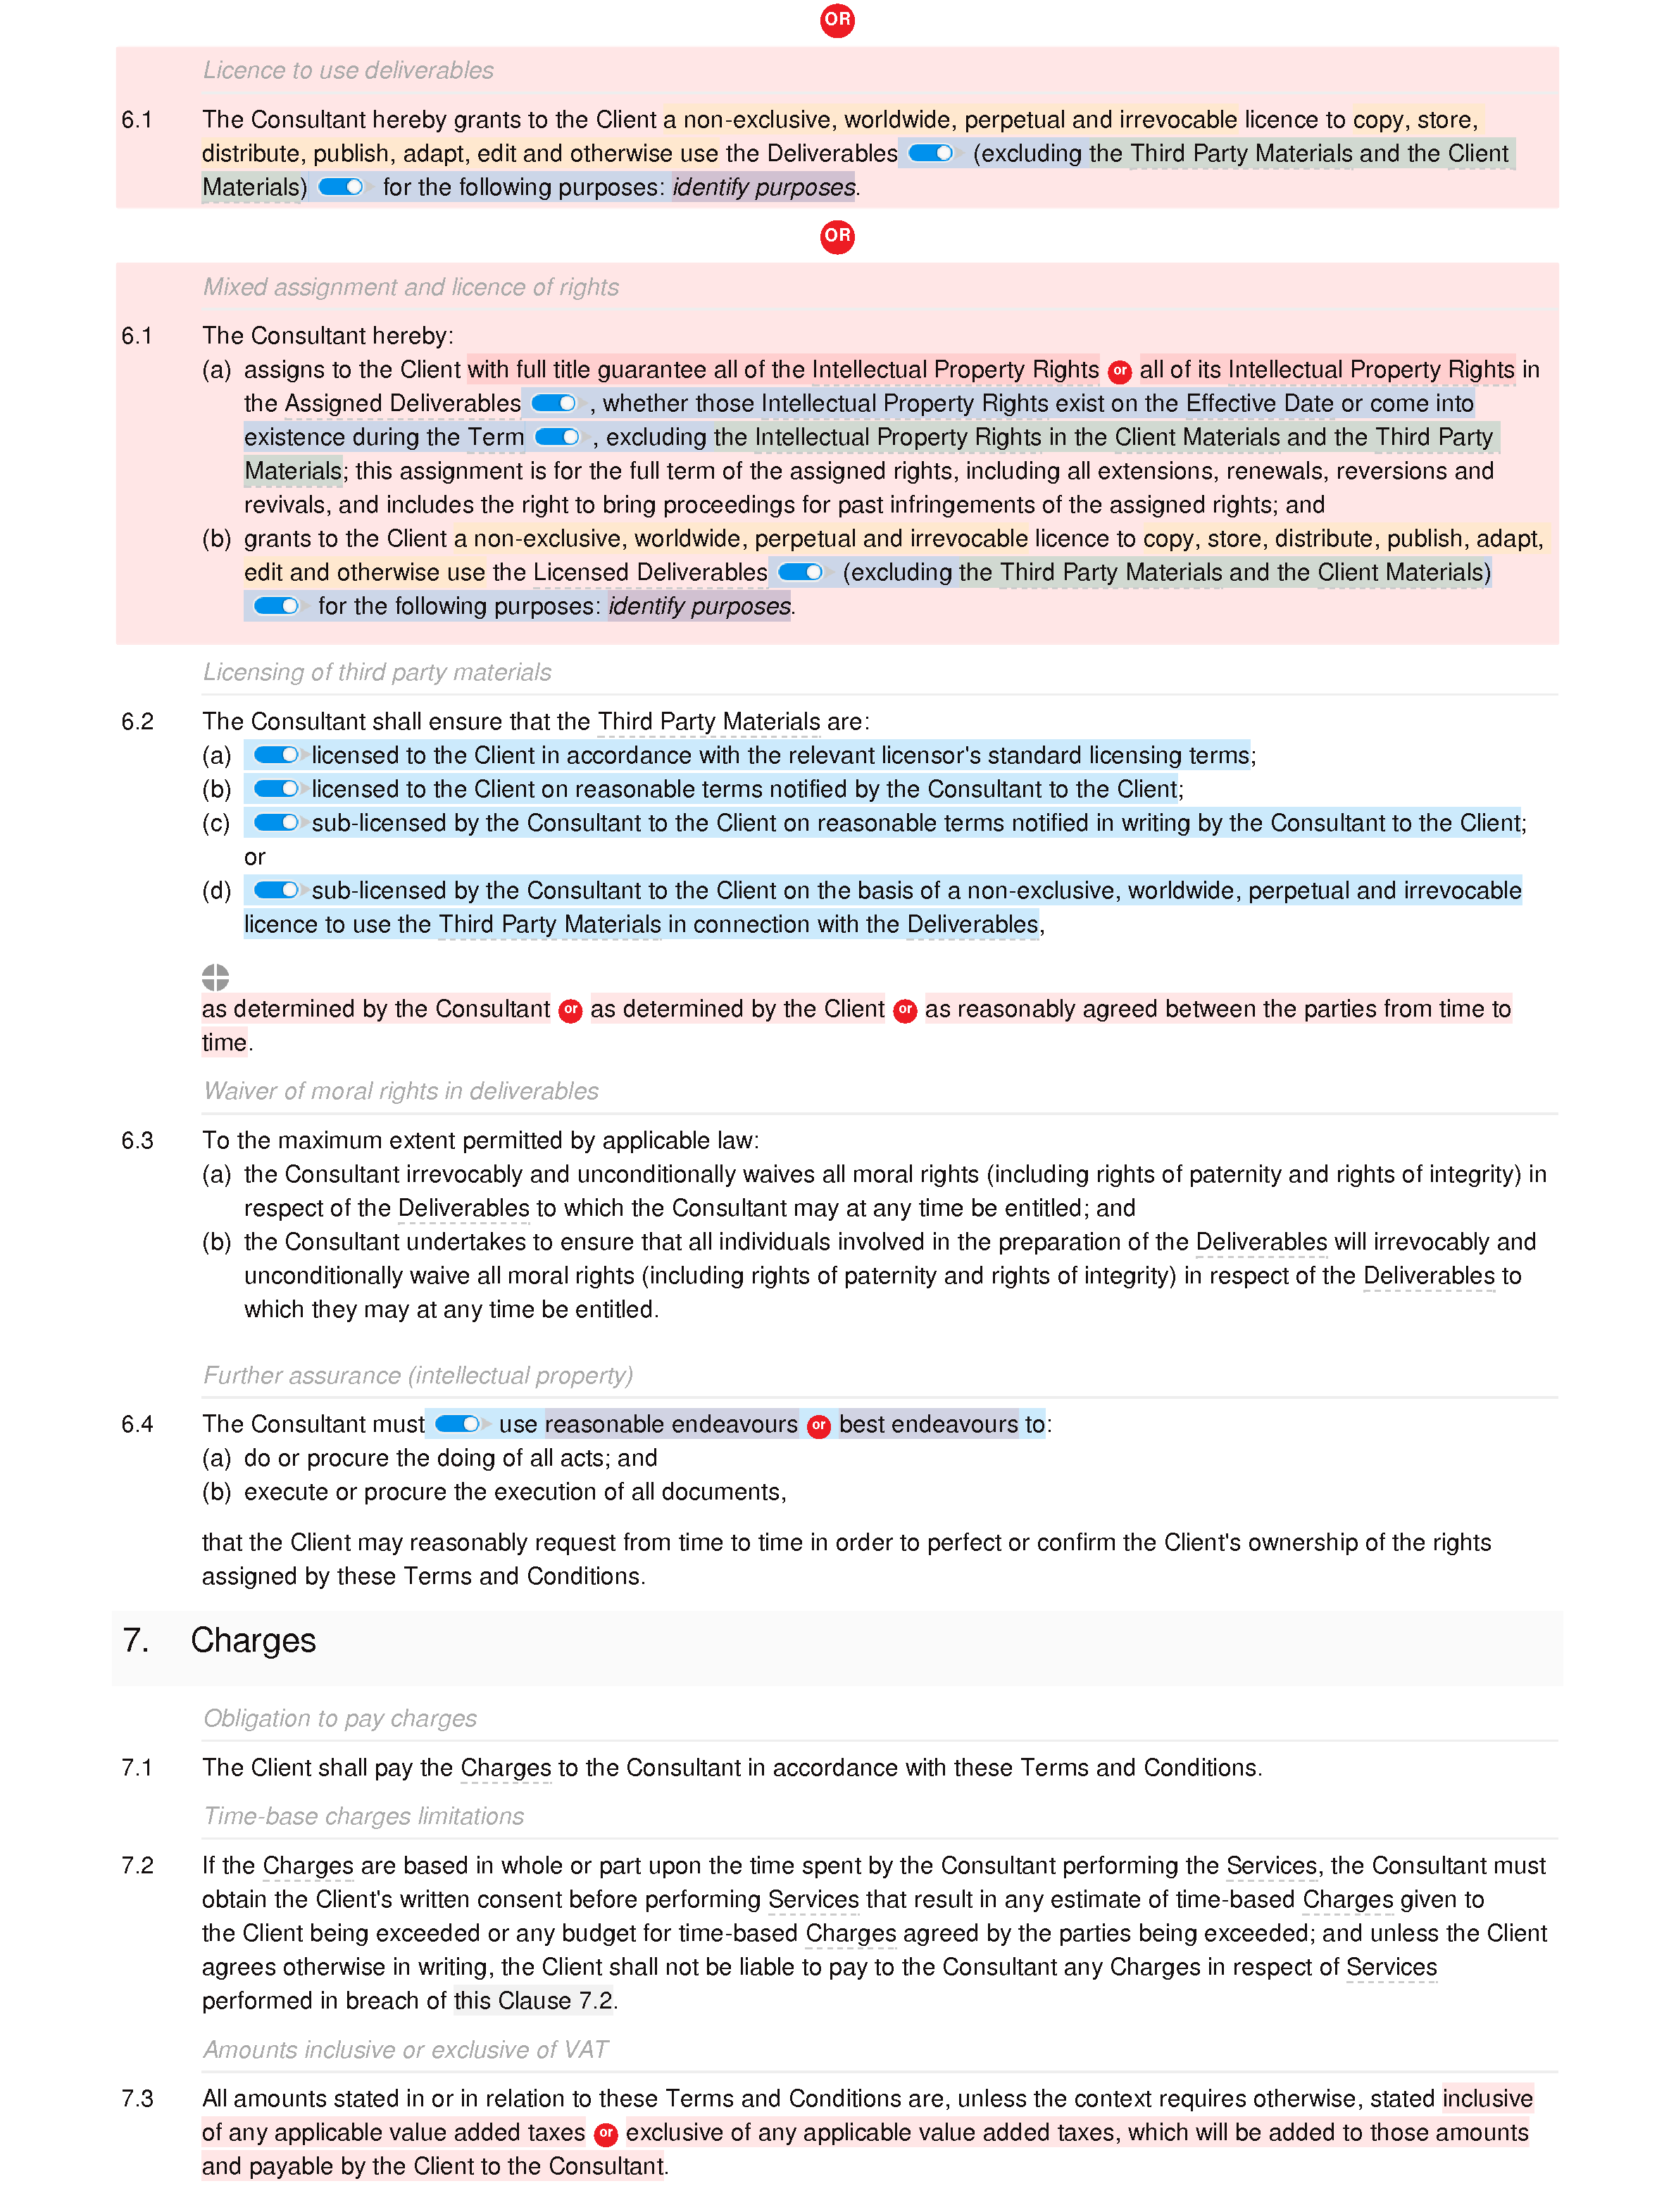 Consultancy terms and conditions (B2B and B2C) document editor preview